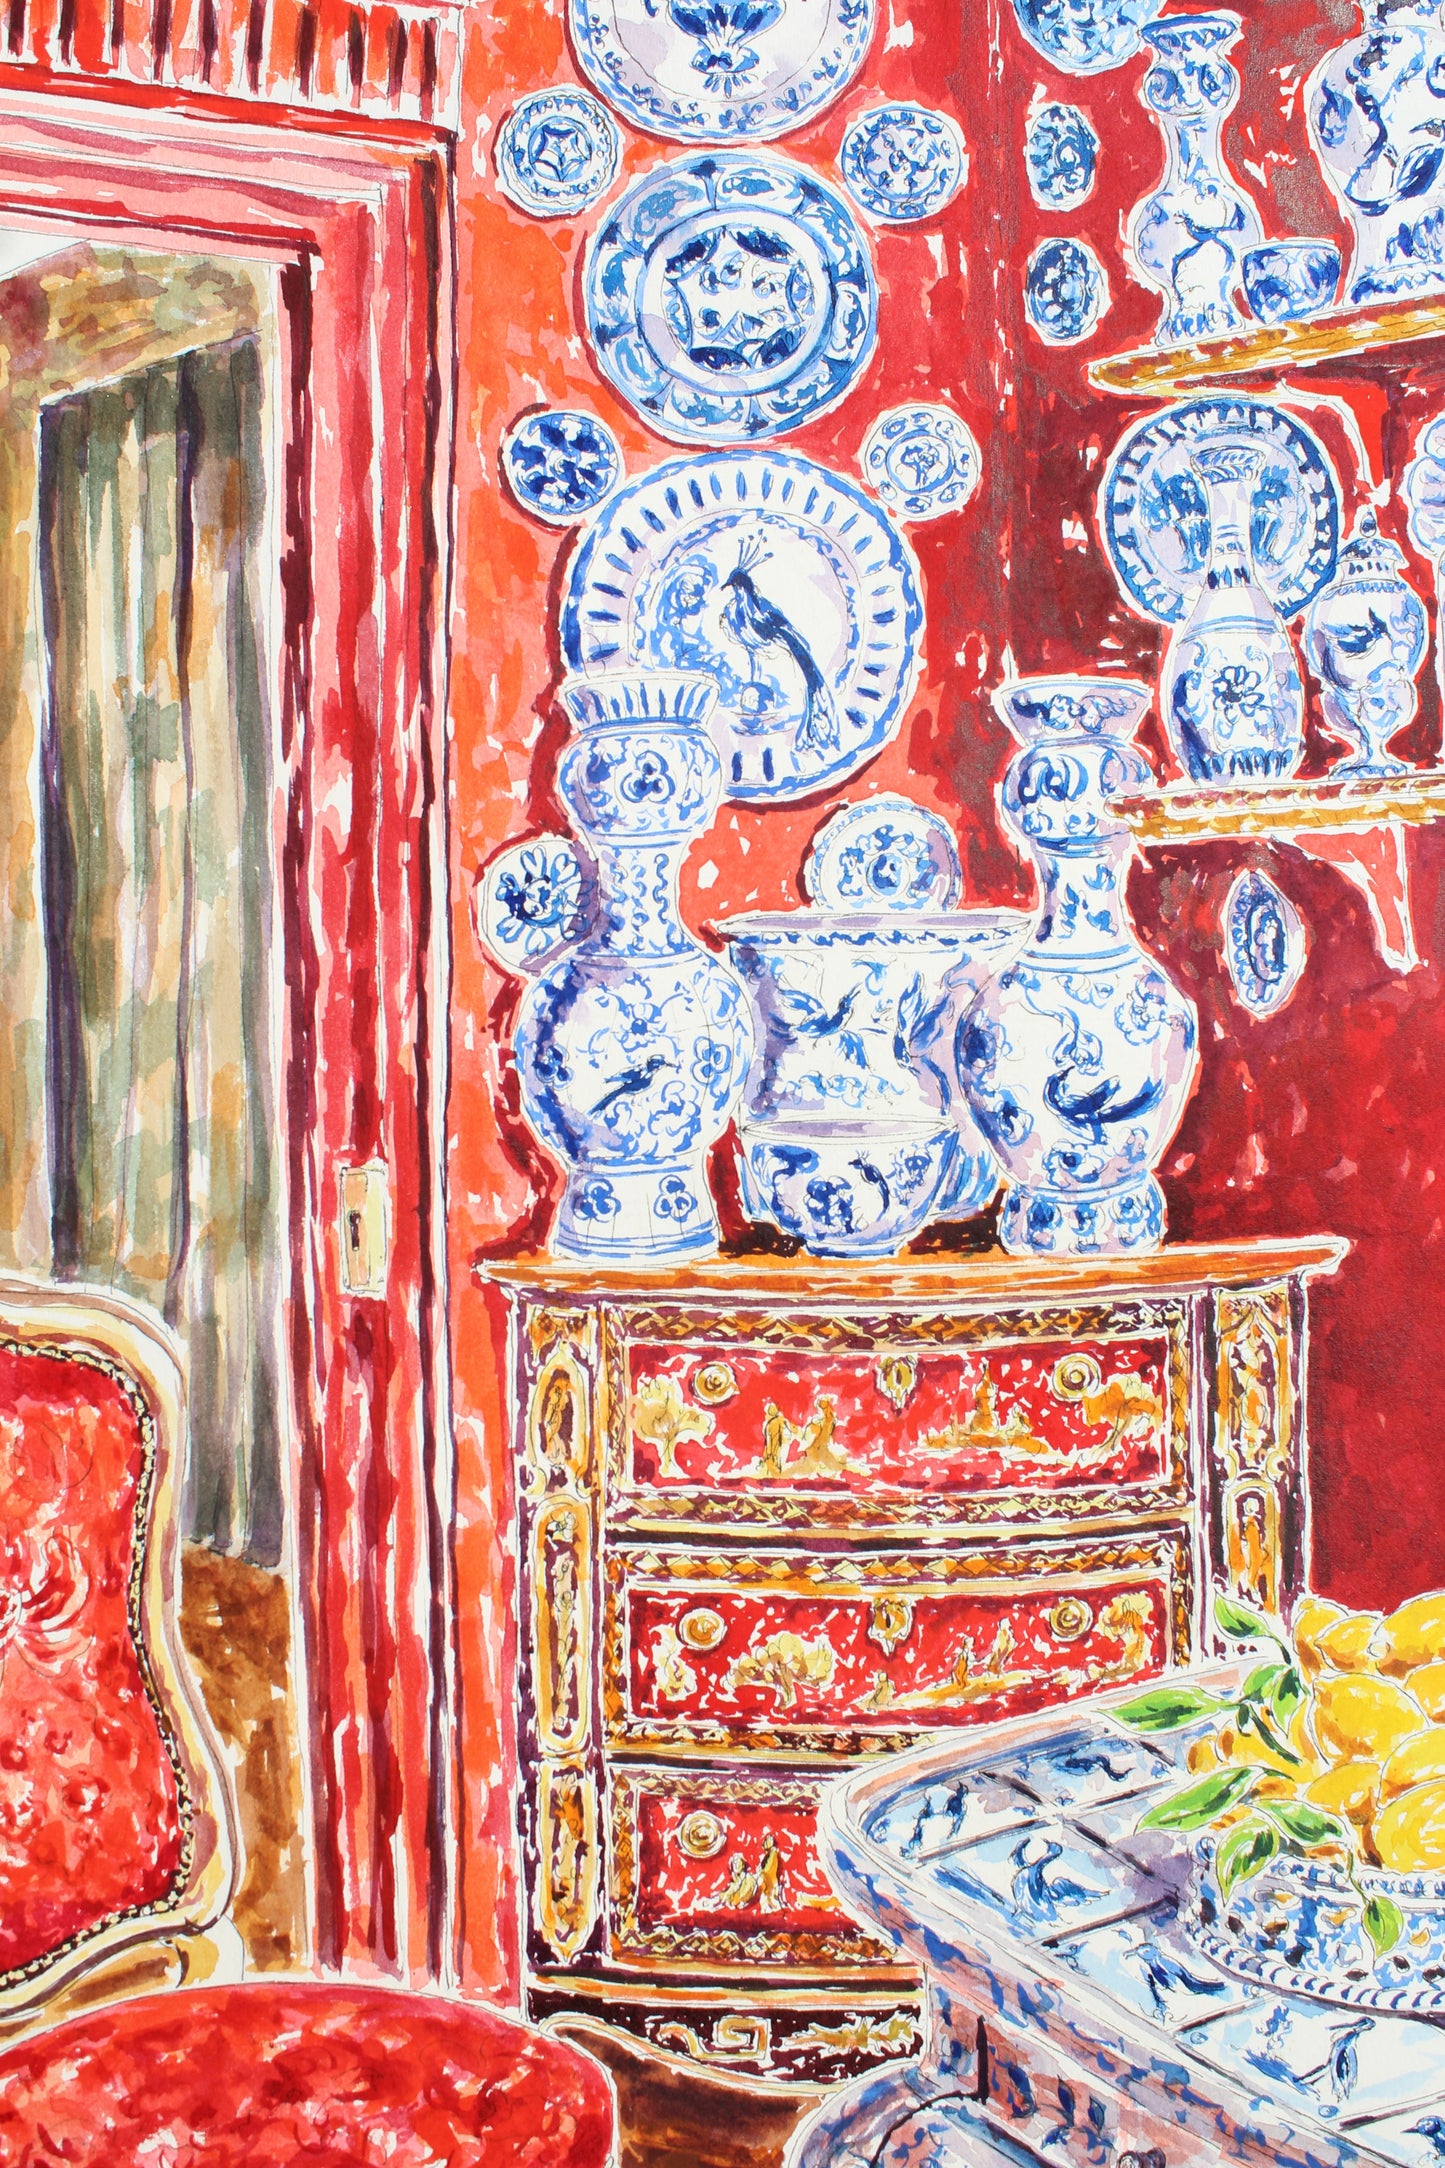 Opulent Chinoiserie, 30" x 22" Original Watercolor And Ink Painting Of Blue And White Ceramics And A Red Wall